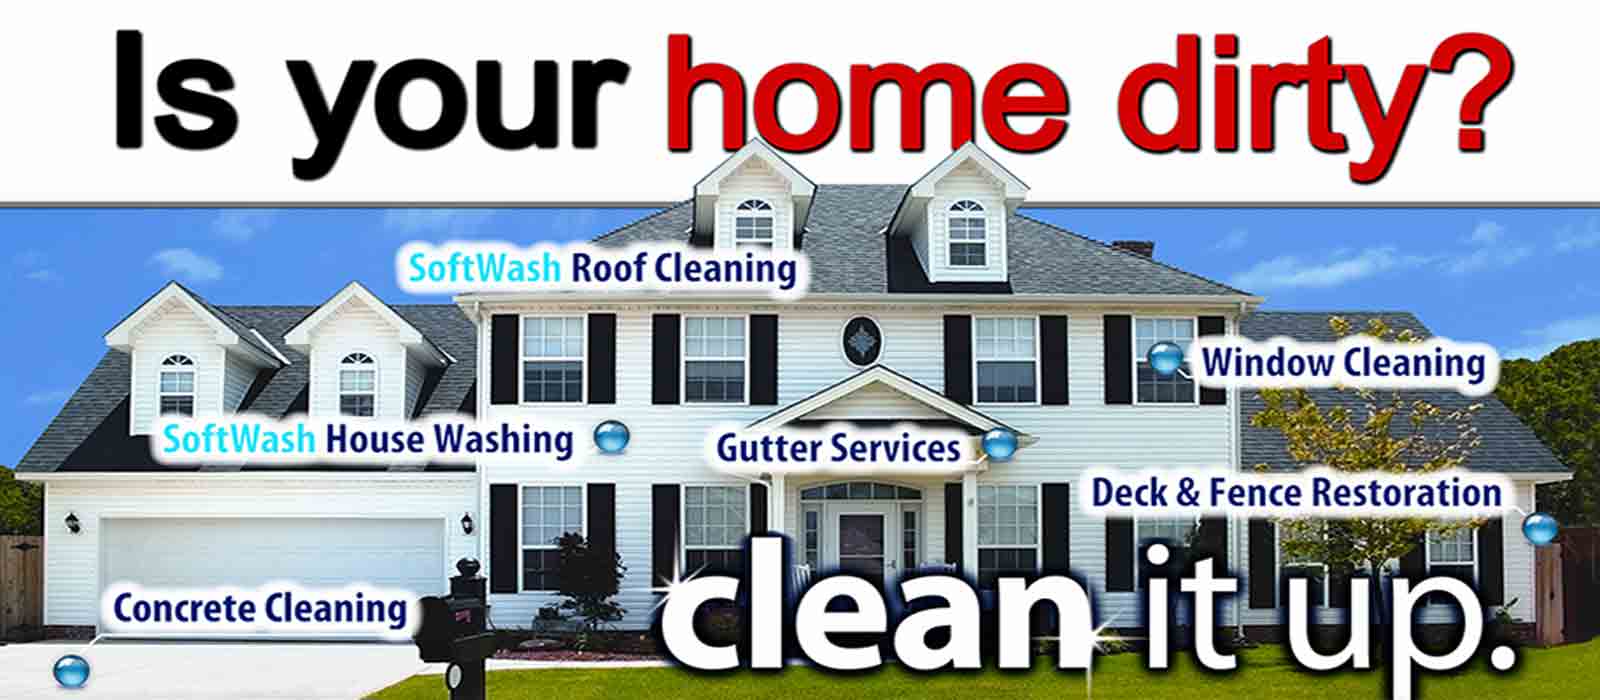 Power Washing Services in Milwaukie OR